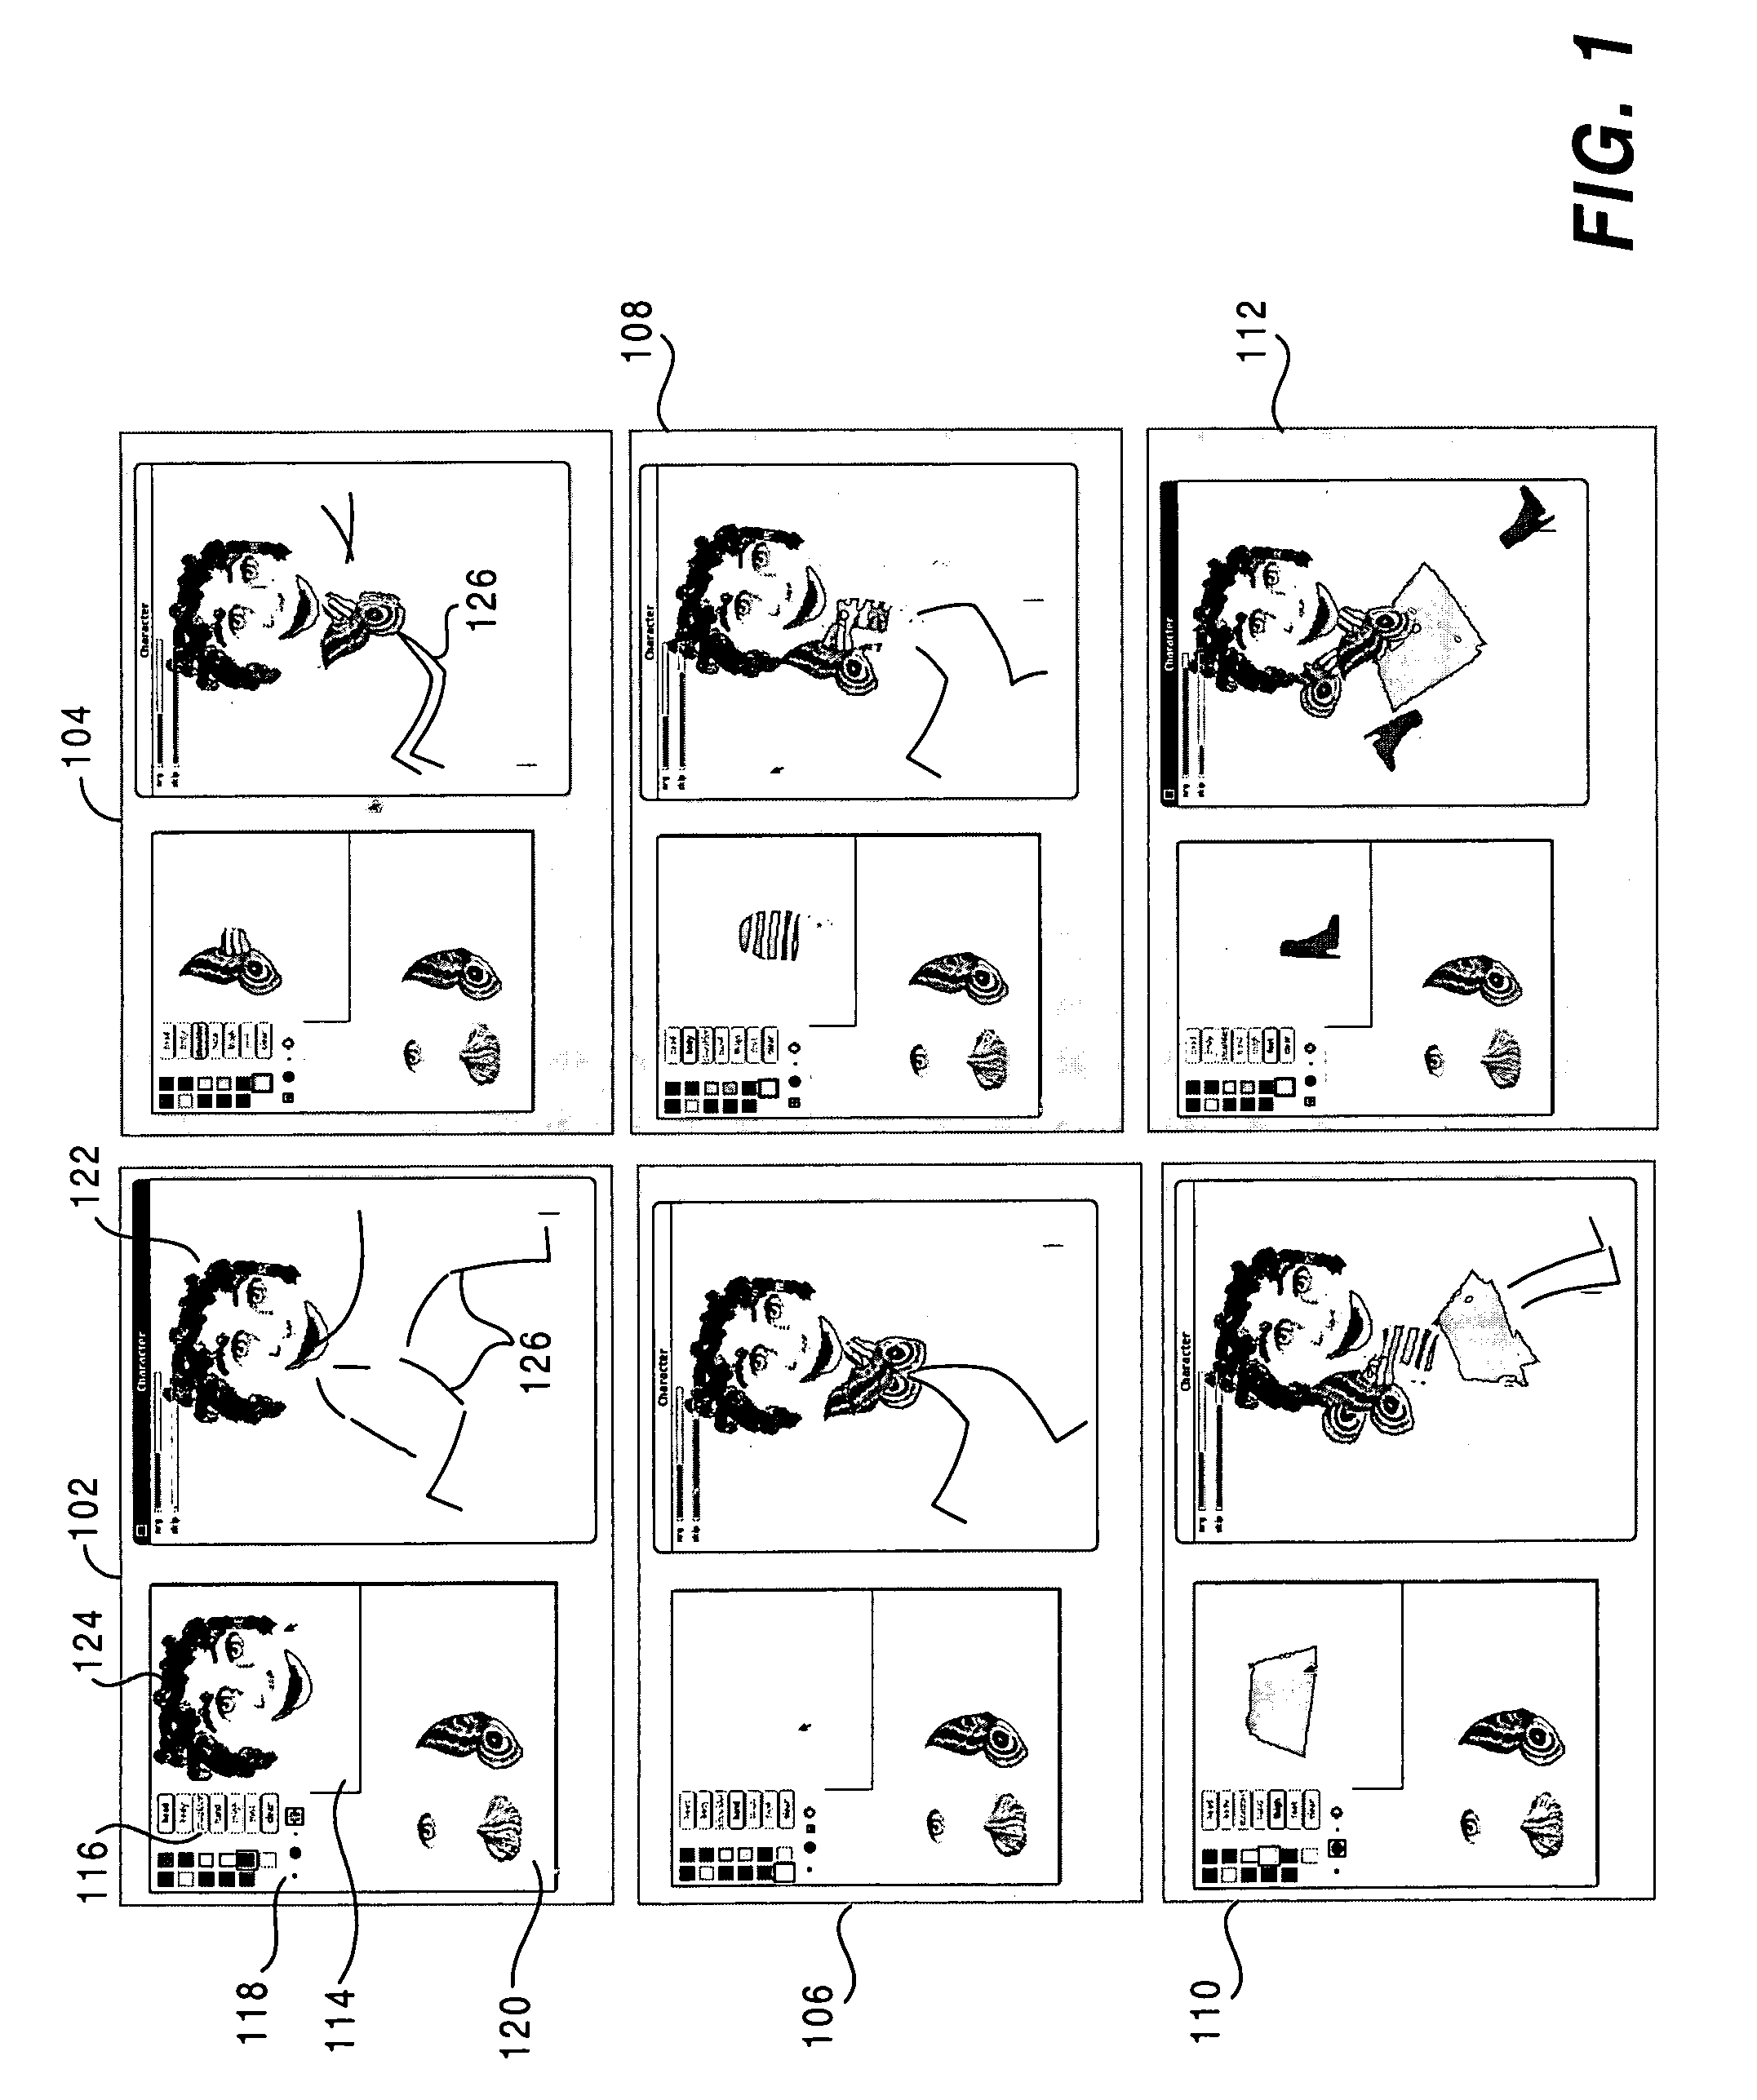 Methods and systems for a character motion animation tool